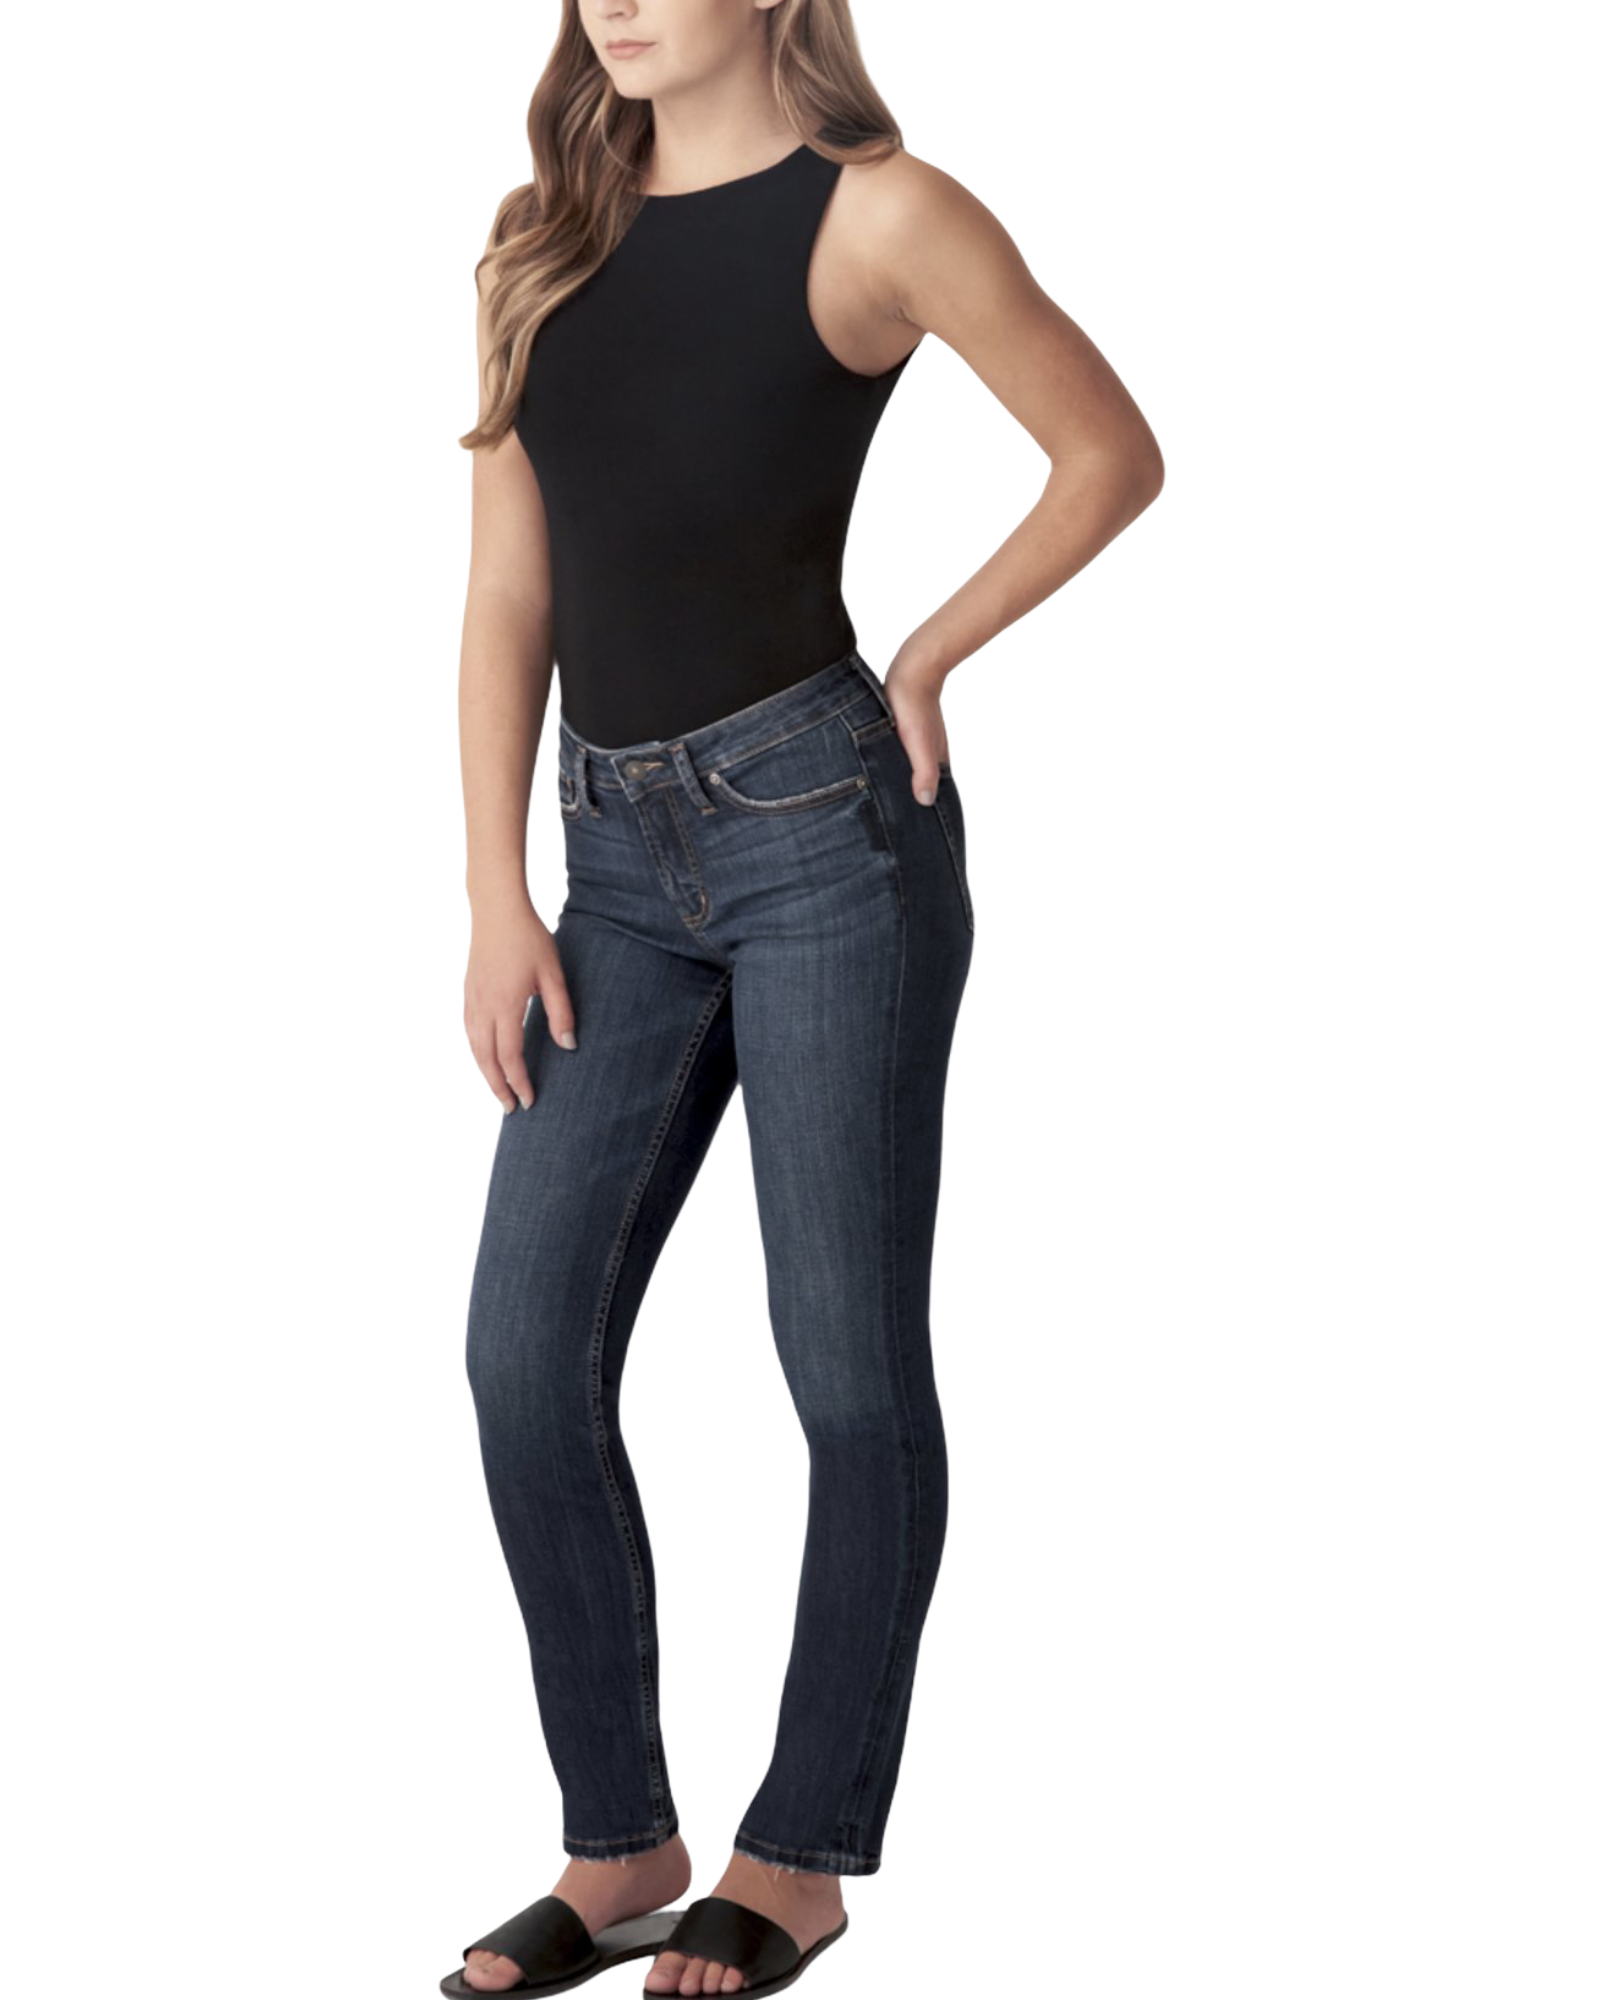 Silver Jeans Co. Most Wanted Mid Rise Straight Leg Jeans.